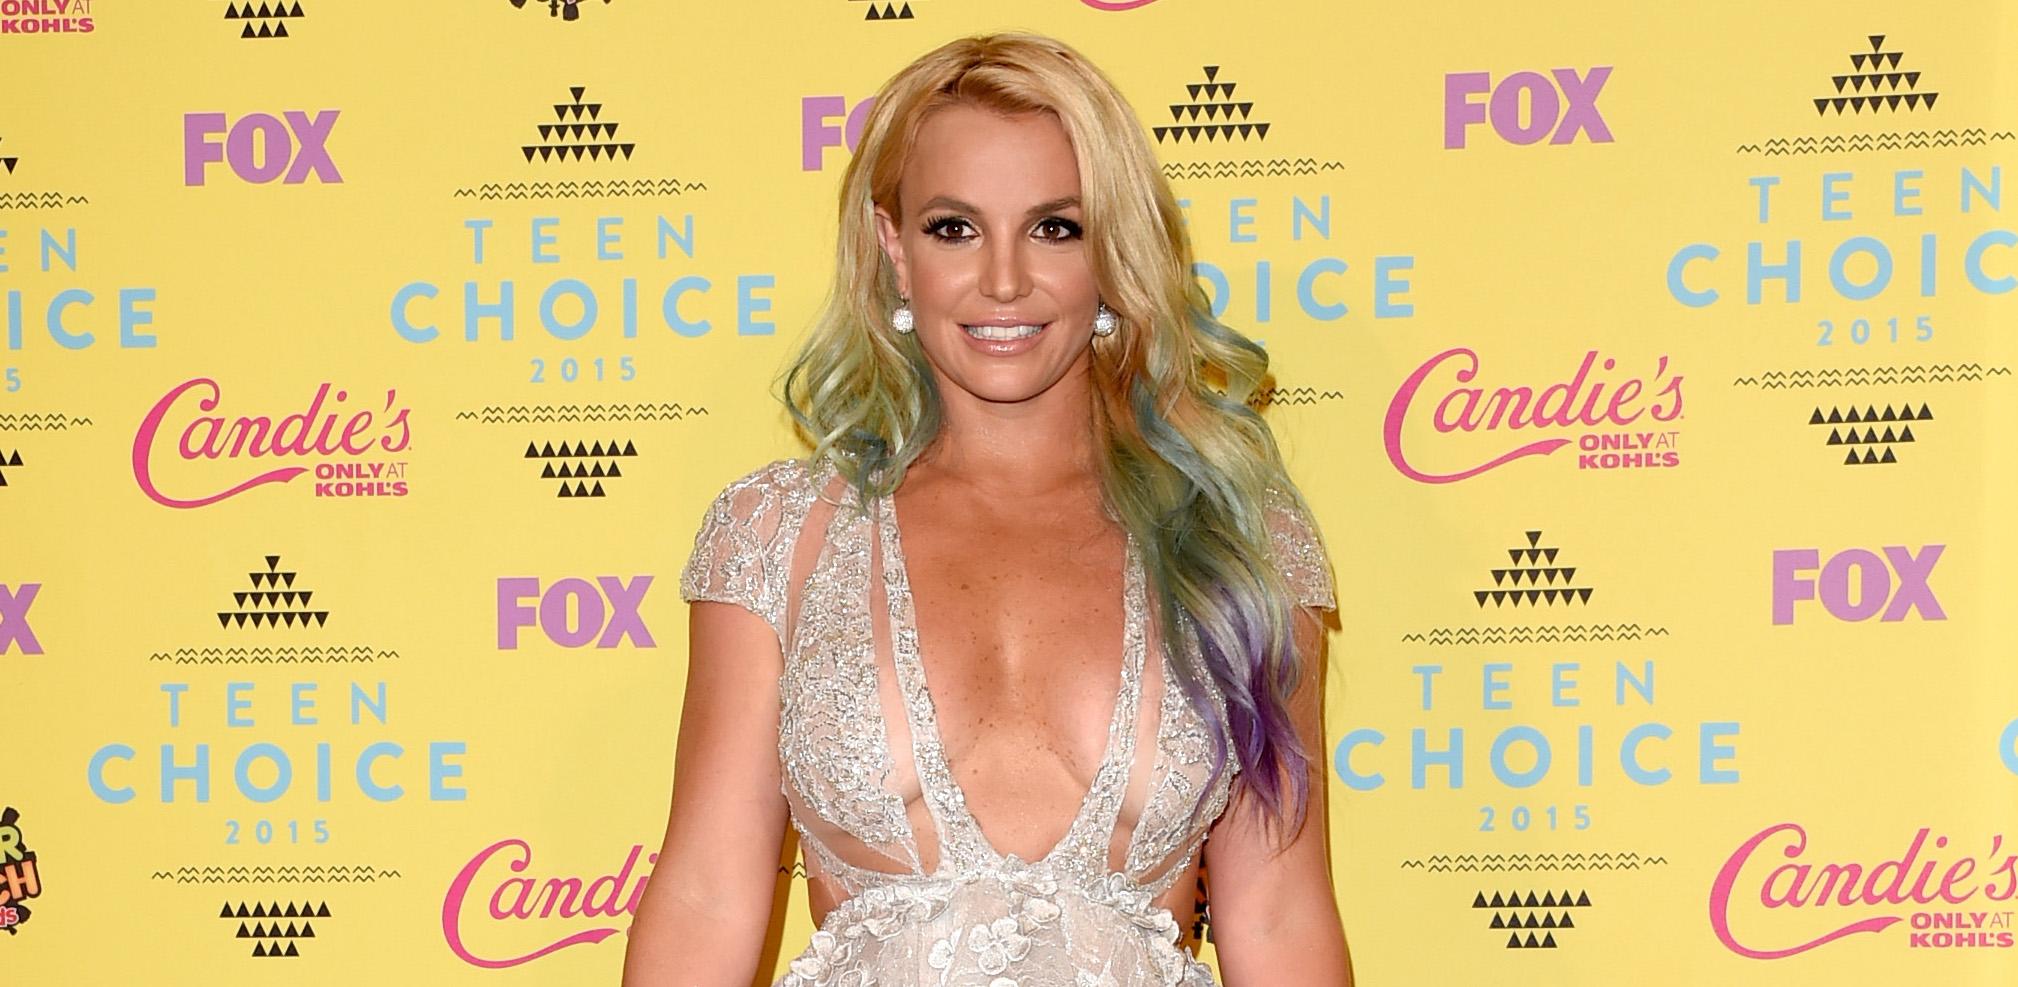 Britney Spears' Book What's the Release Date? Here's What We Know So Far